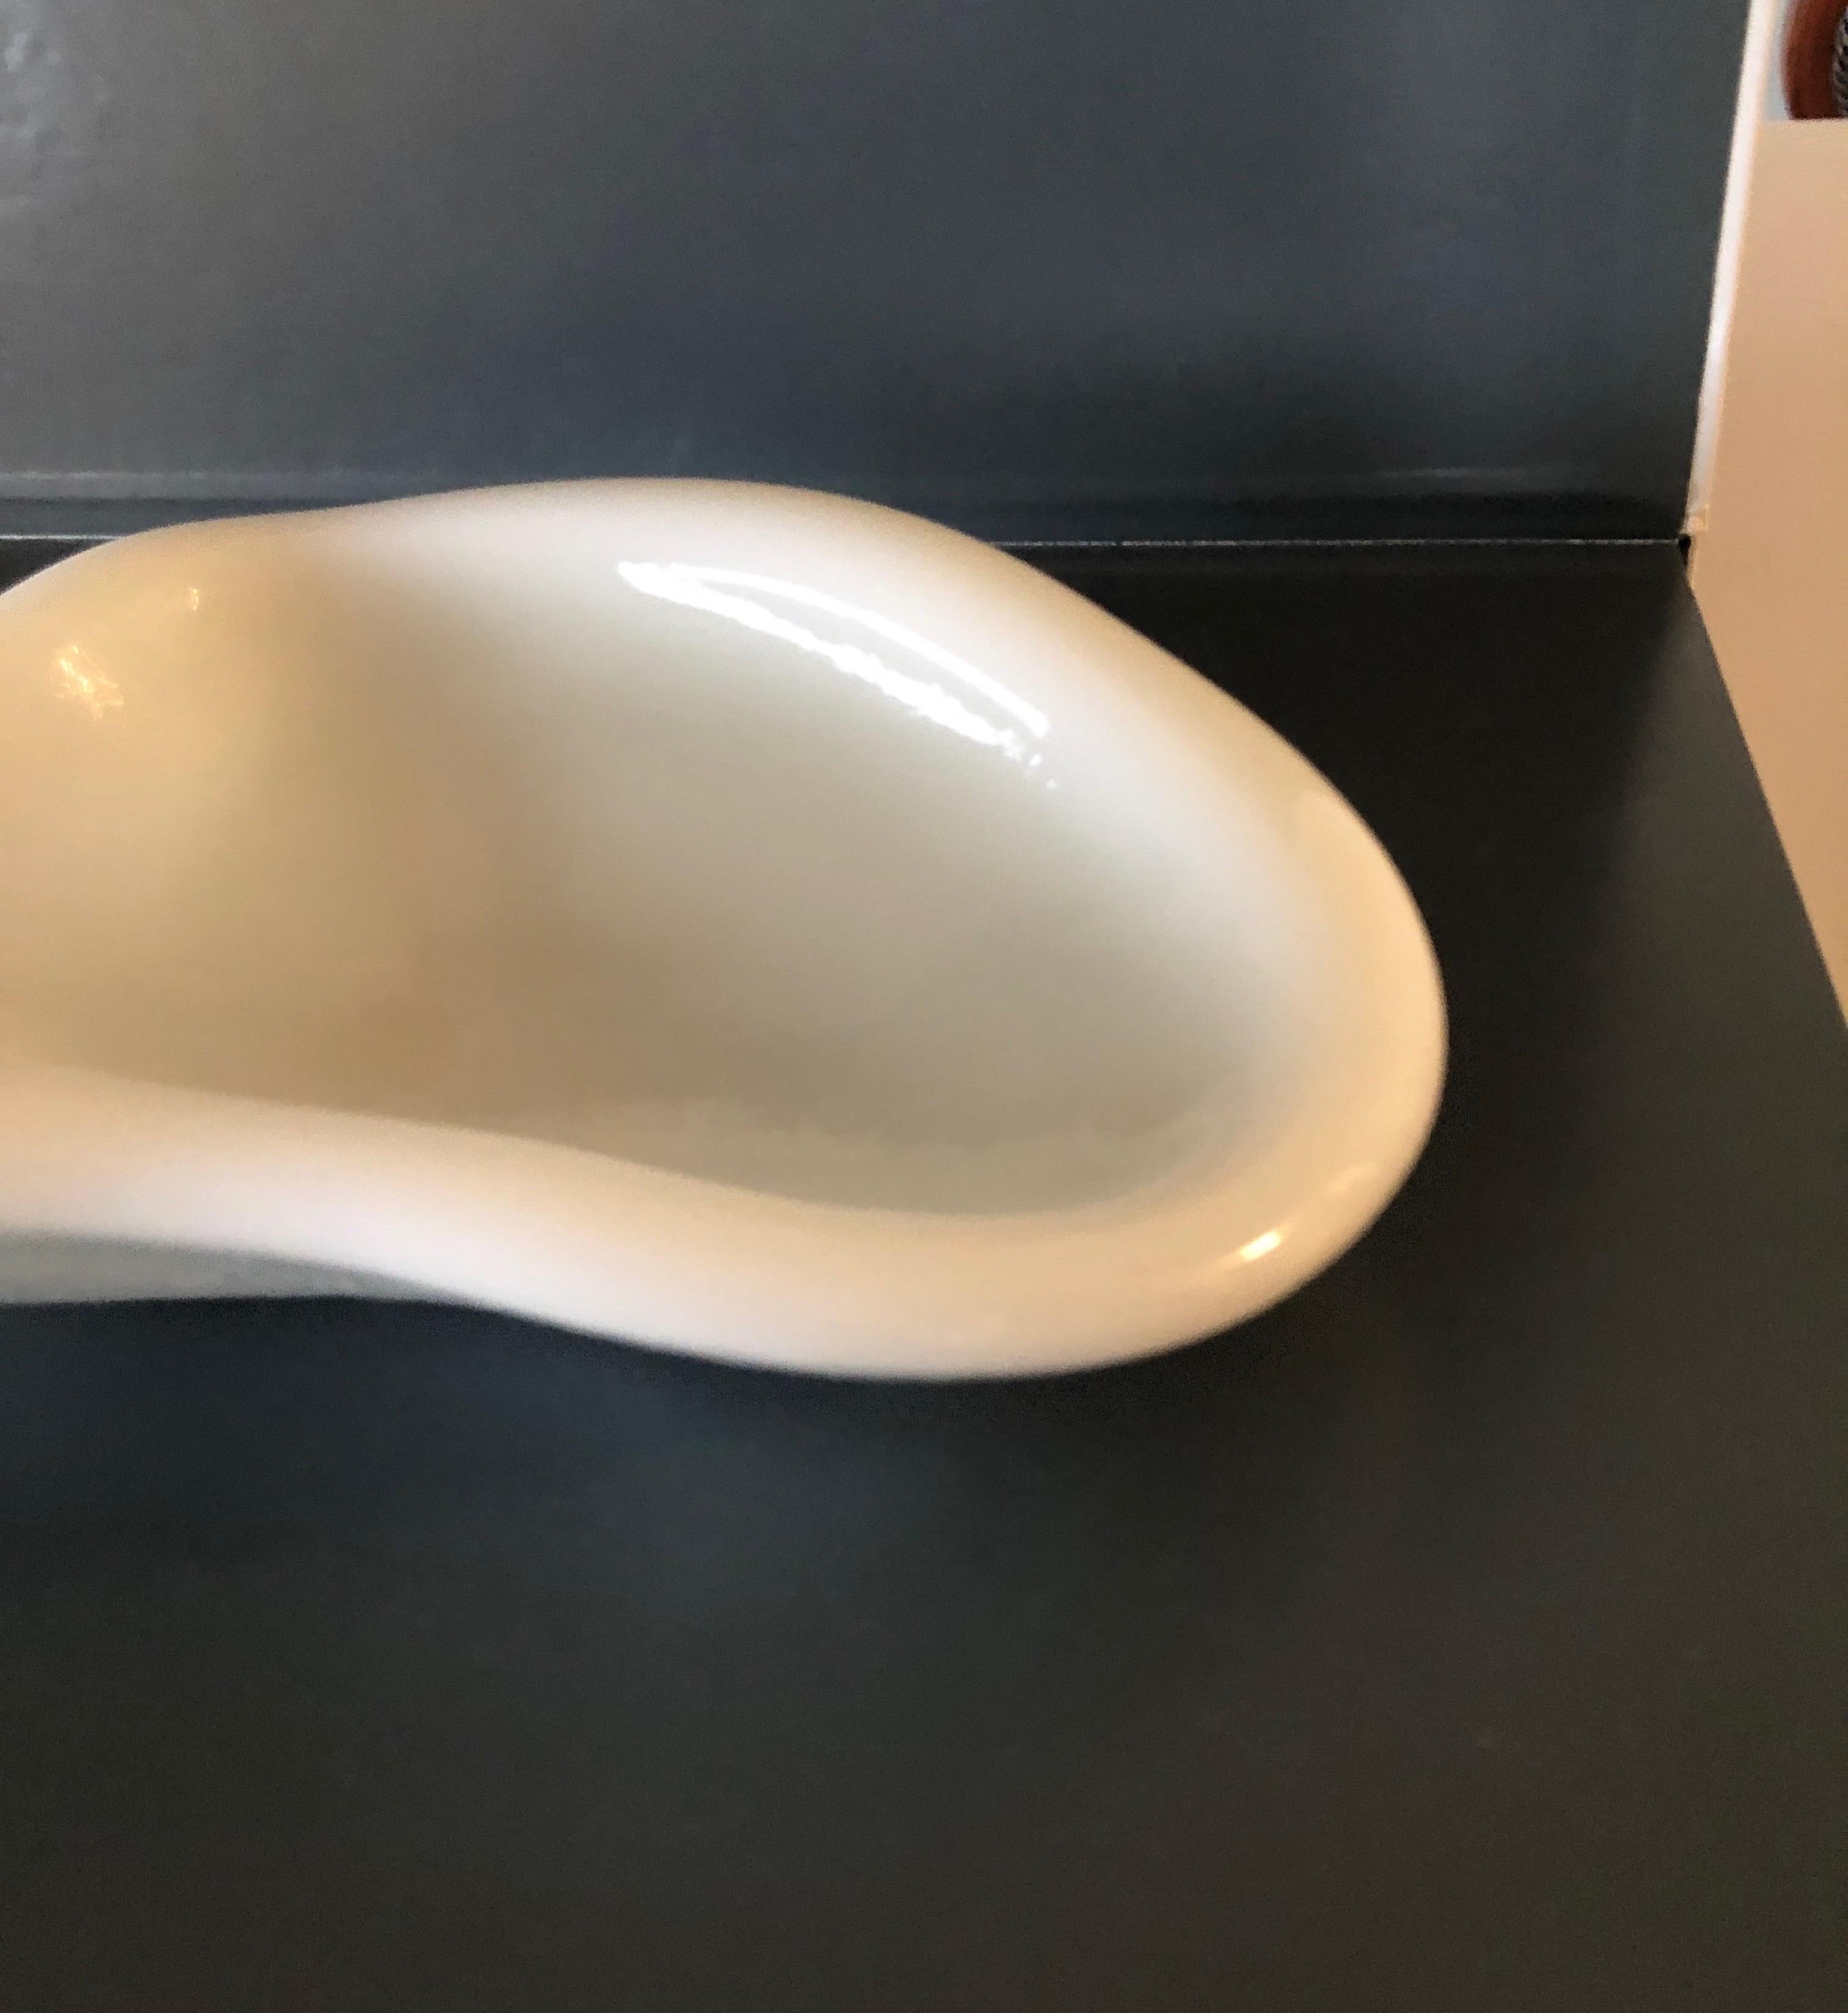 Mid-Century Modern milk glass free-form decorative dish.
Ideal as candy dish, soap dish, desk accessory.
Size: 8.25